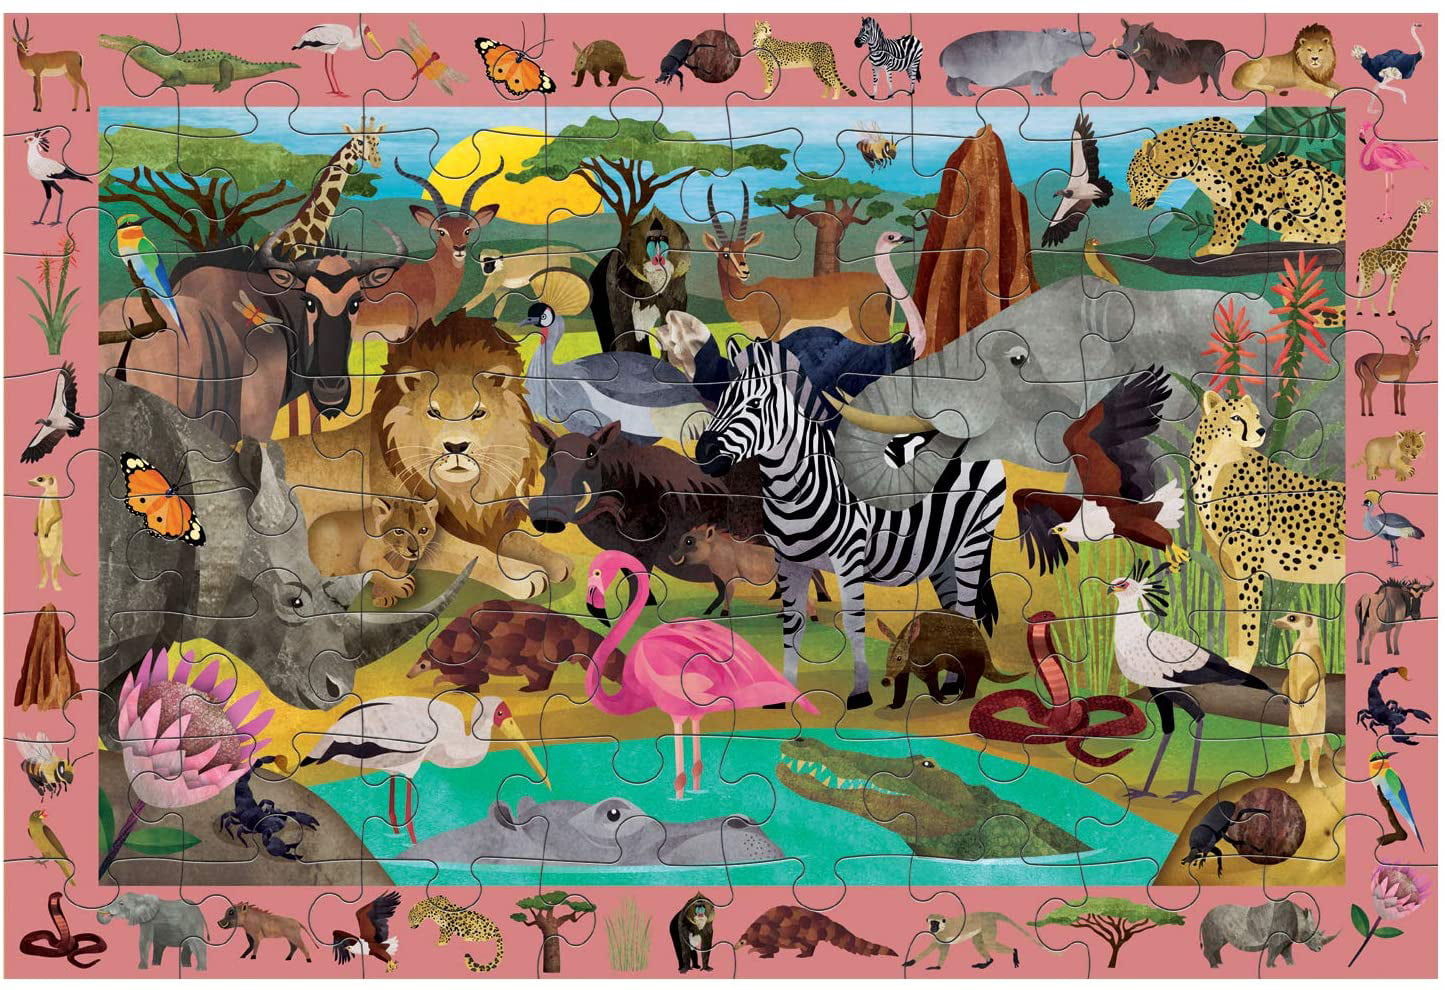 African Safari Search and Find Puzzle, 64 Pieces, 23” x ” – Jigsaw  Puzzle for Kids Age 4+, Colorful Illustrations of Animals, Insects &  Plants, Complete Puzzle to Find 40+ Hidden Images 